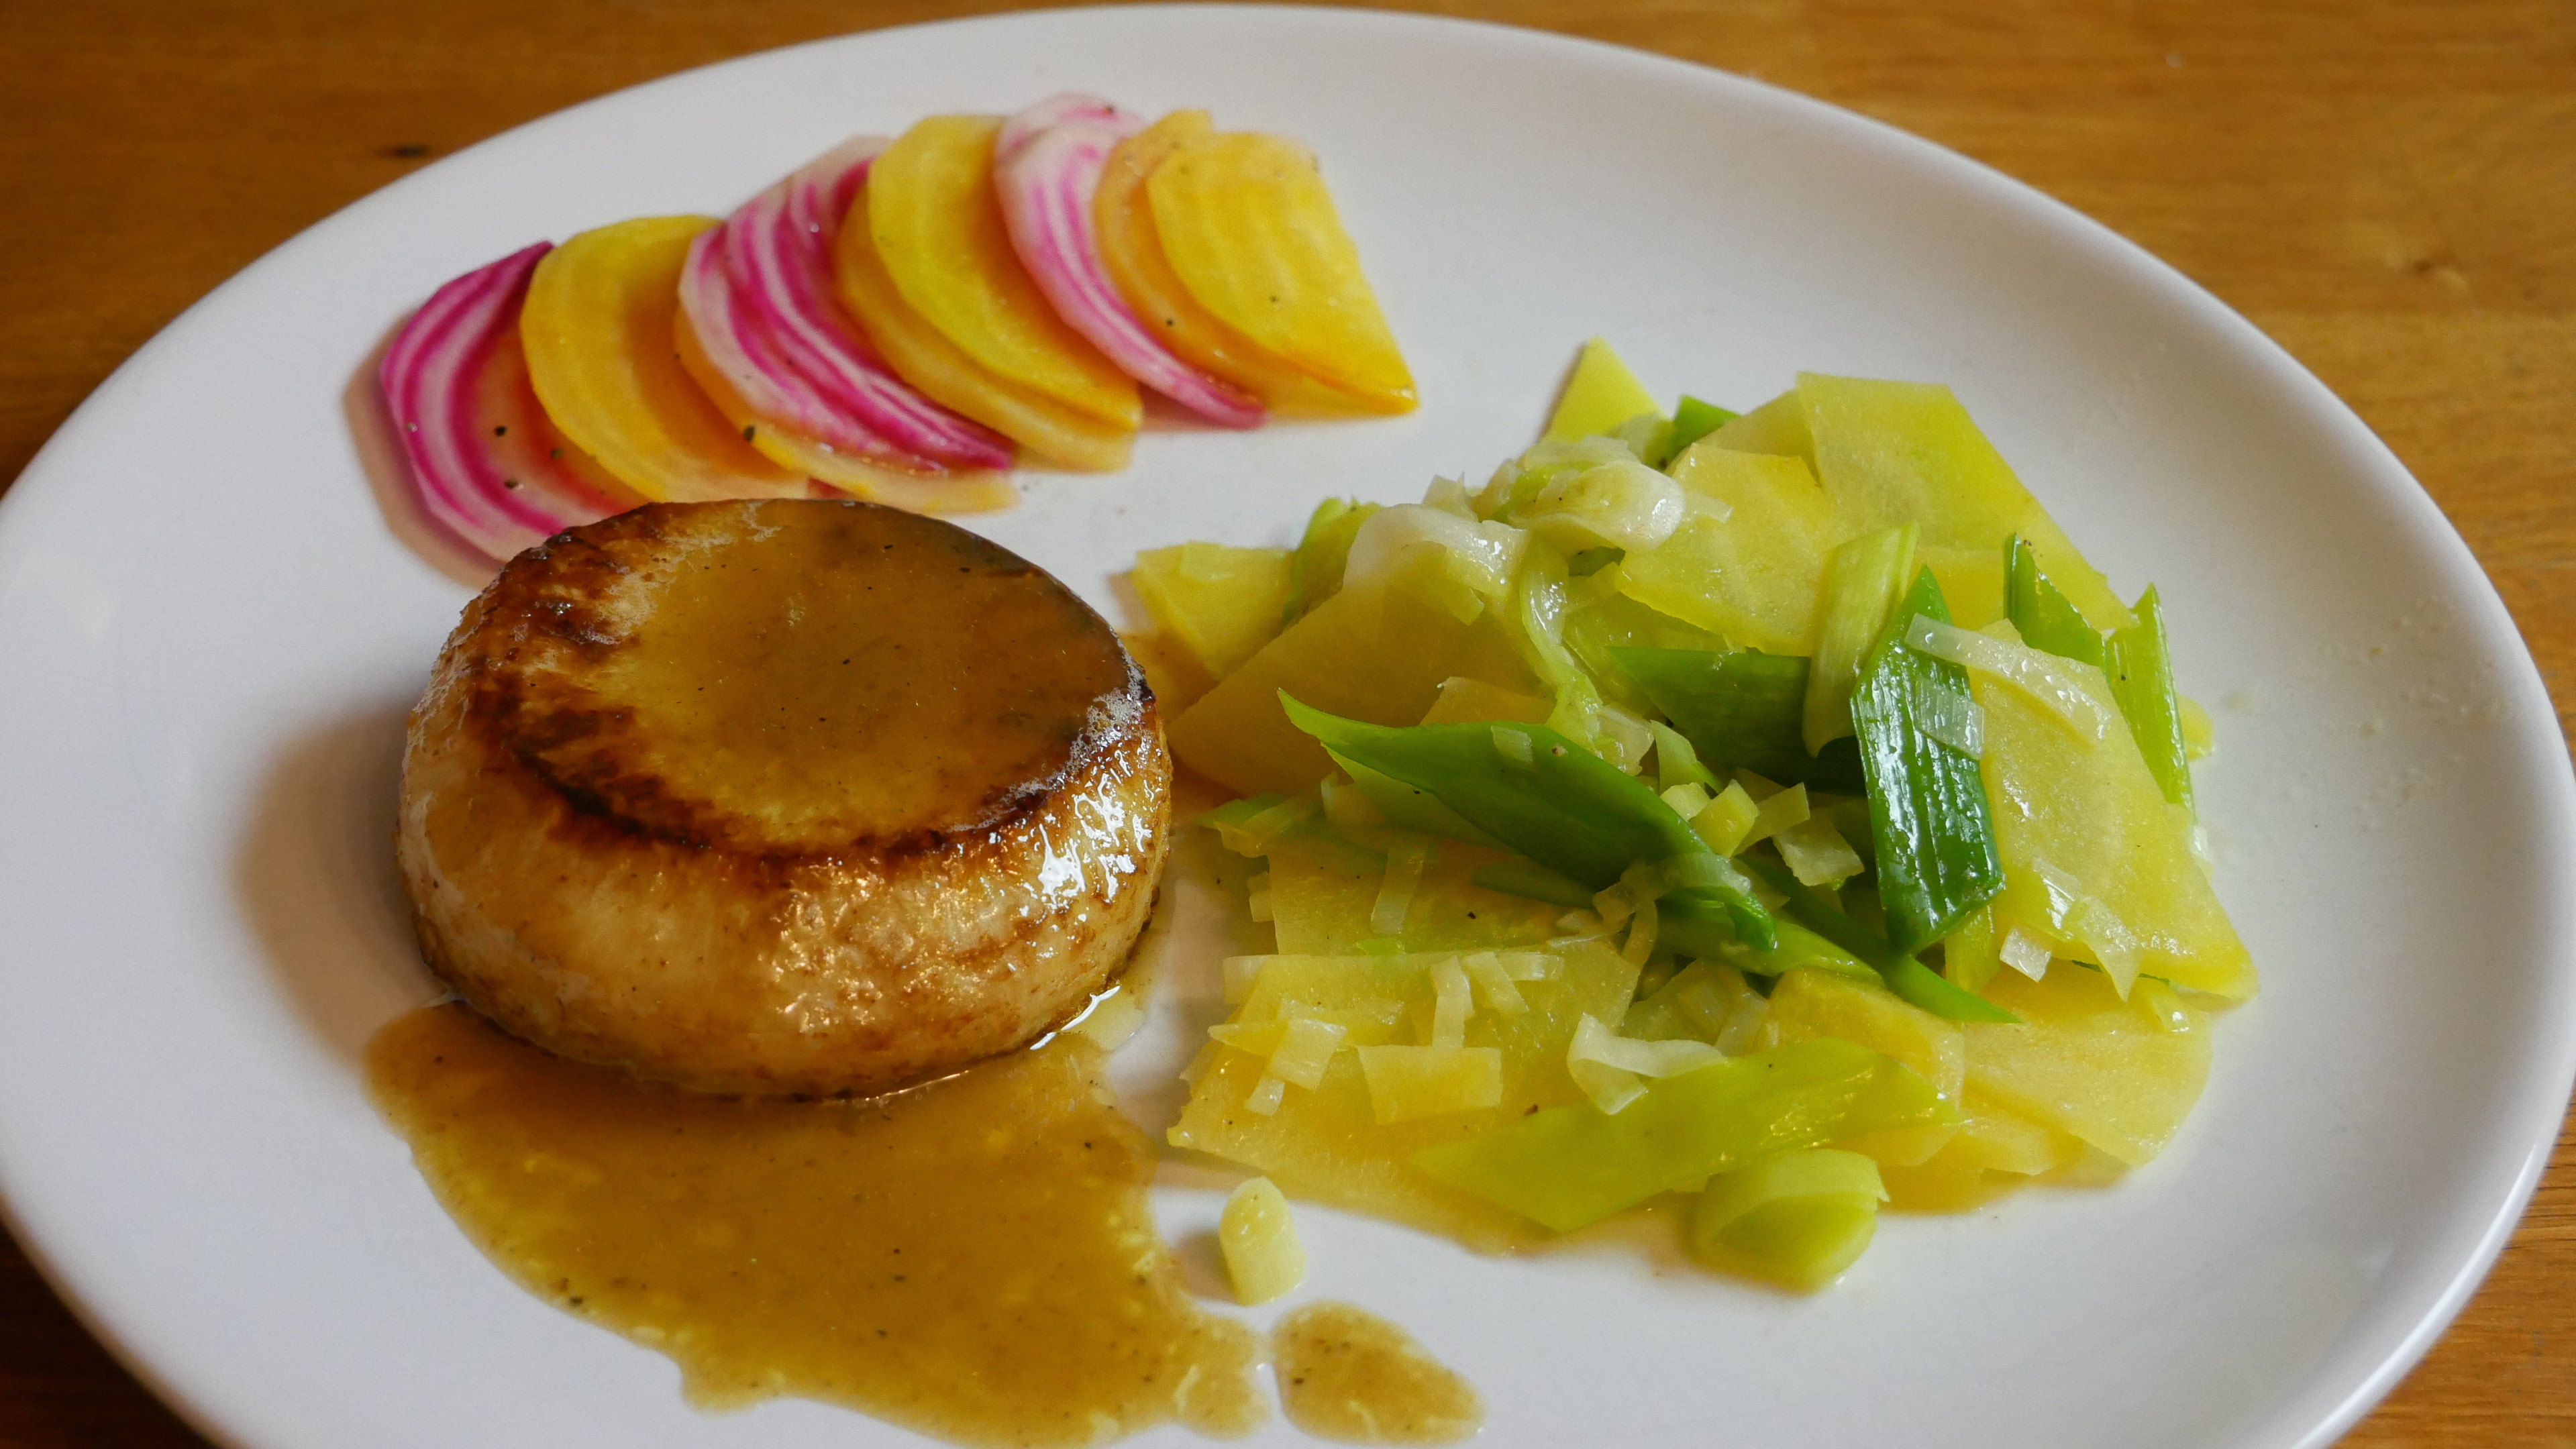 Caramelised #Celeriac in sherry jus (idea by #RaymondBlanc) with my twist of leeks and golden beetroot in butter with nutmeg and a salad of beetroot Chioggia and golden beetroot Wintersonne in white balsamic and olive oil.